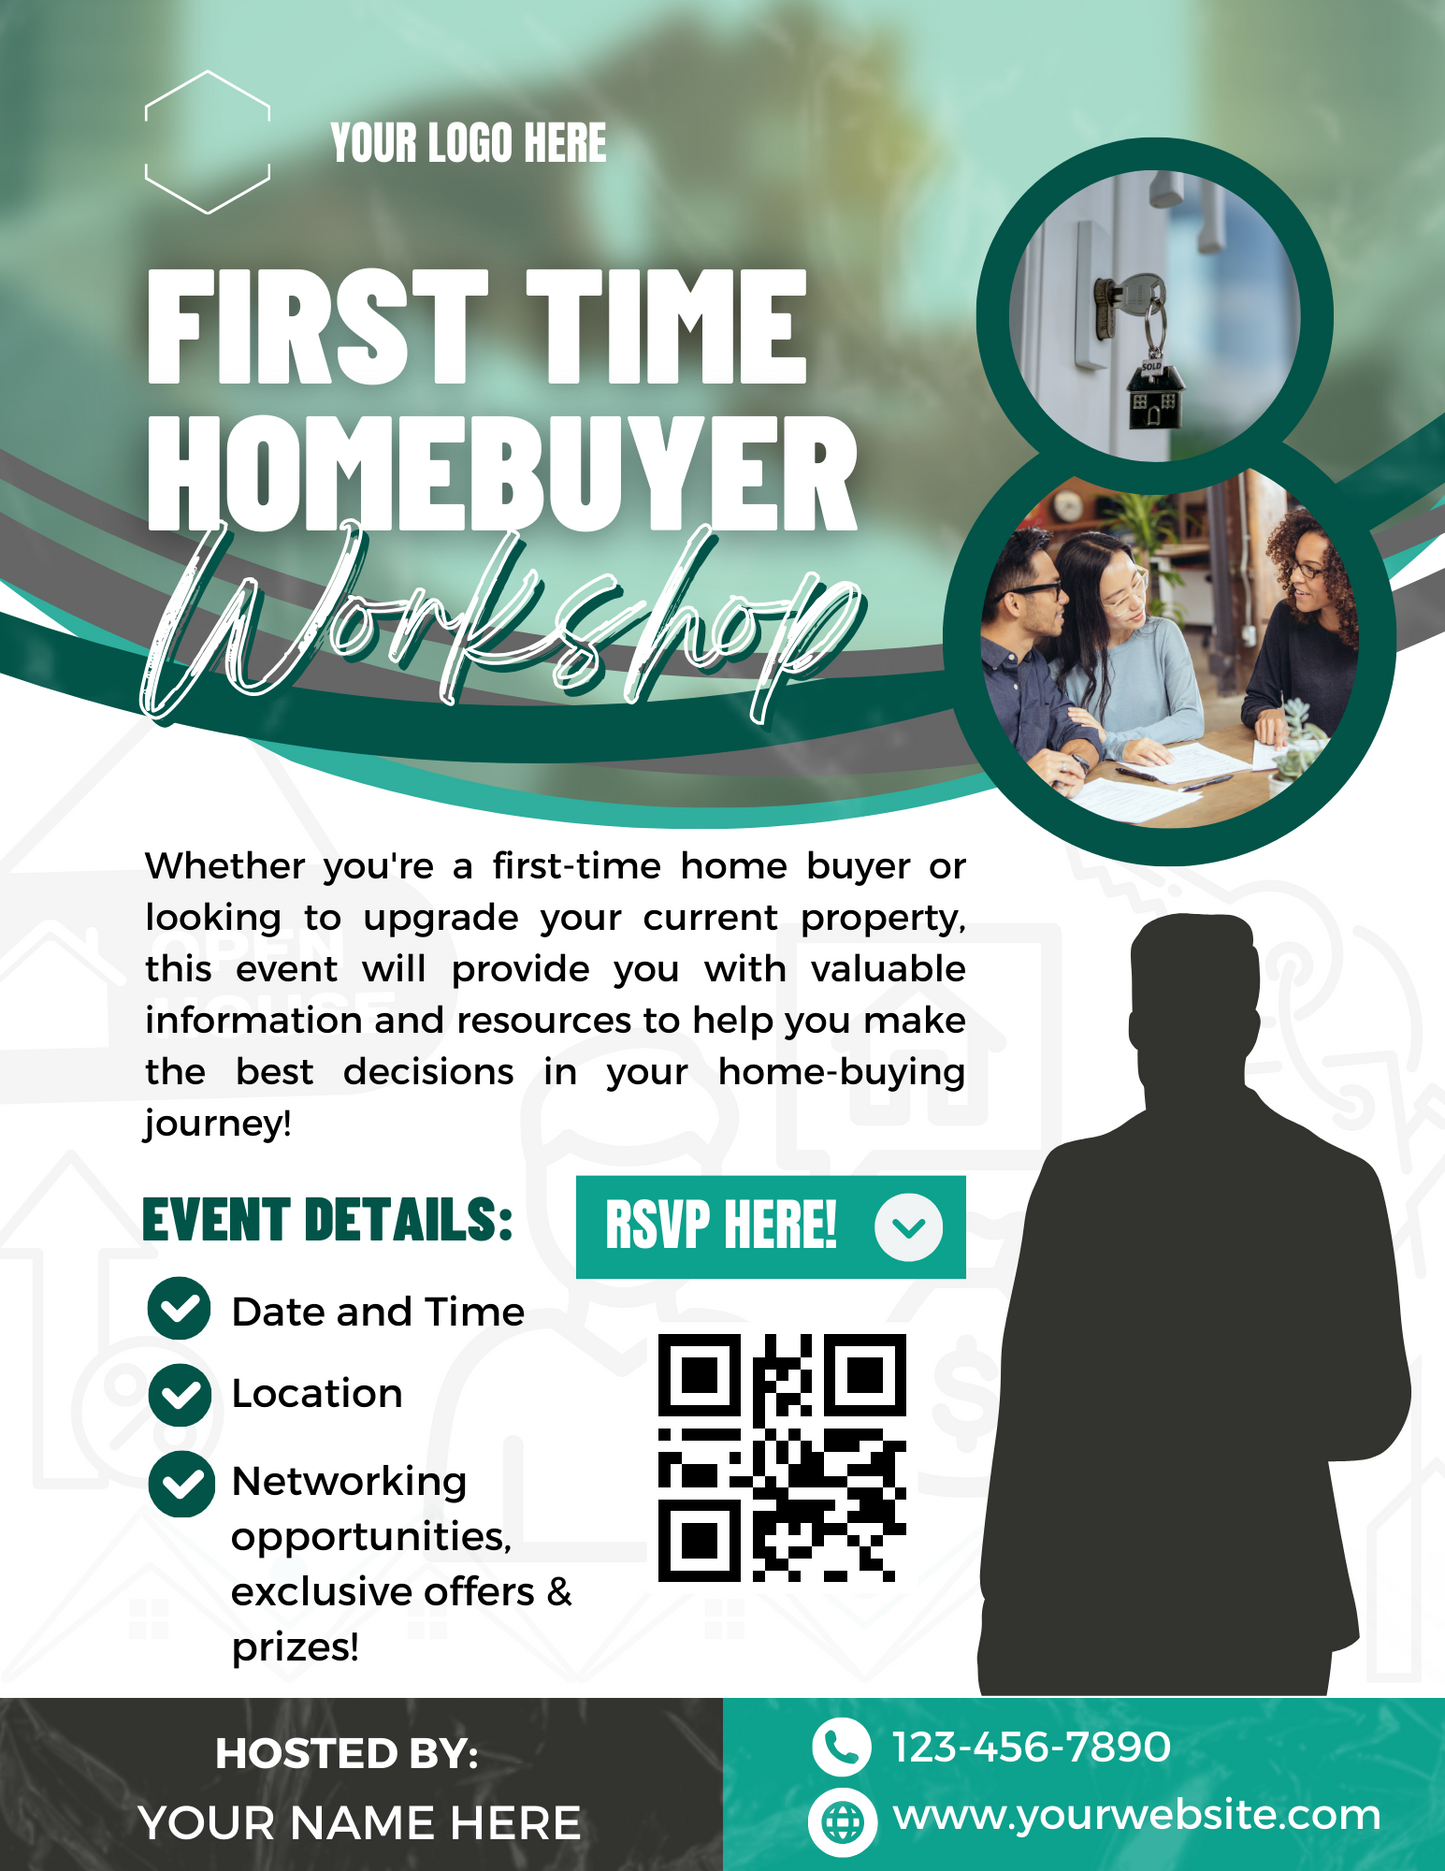 First Time Homebuyer - Event Guide